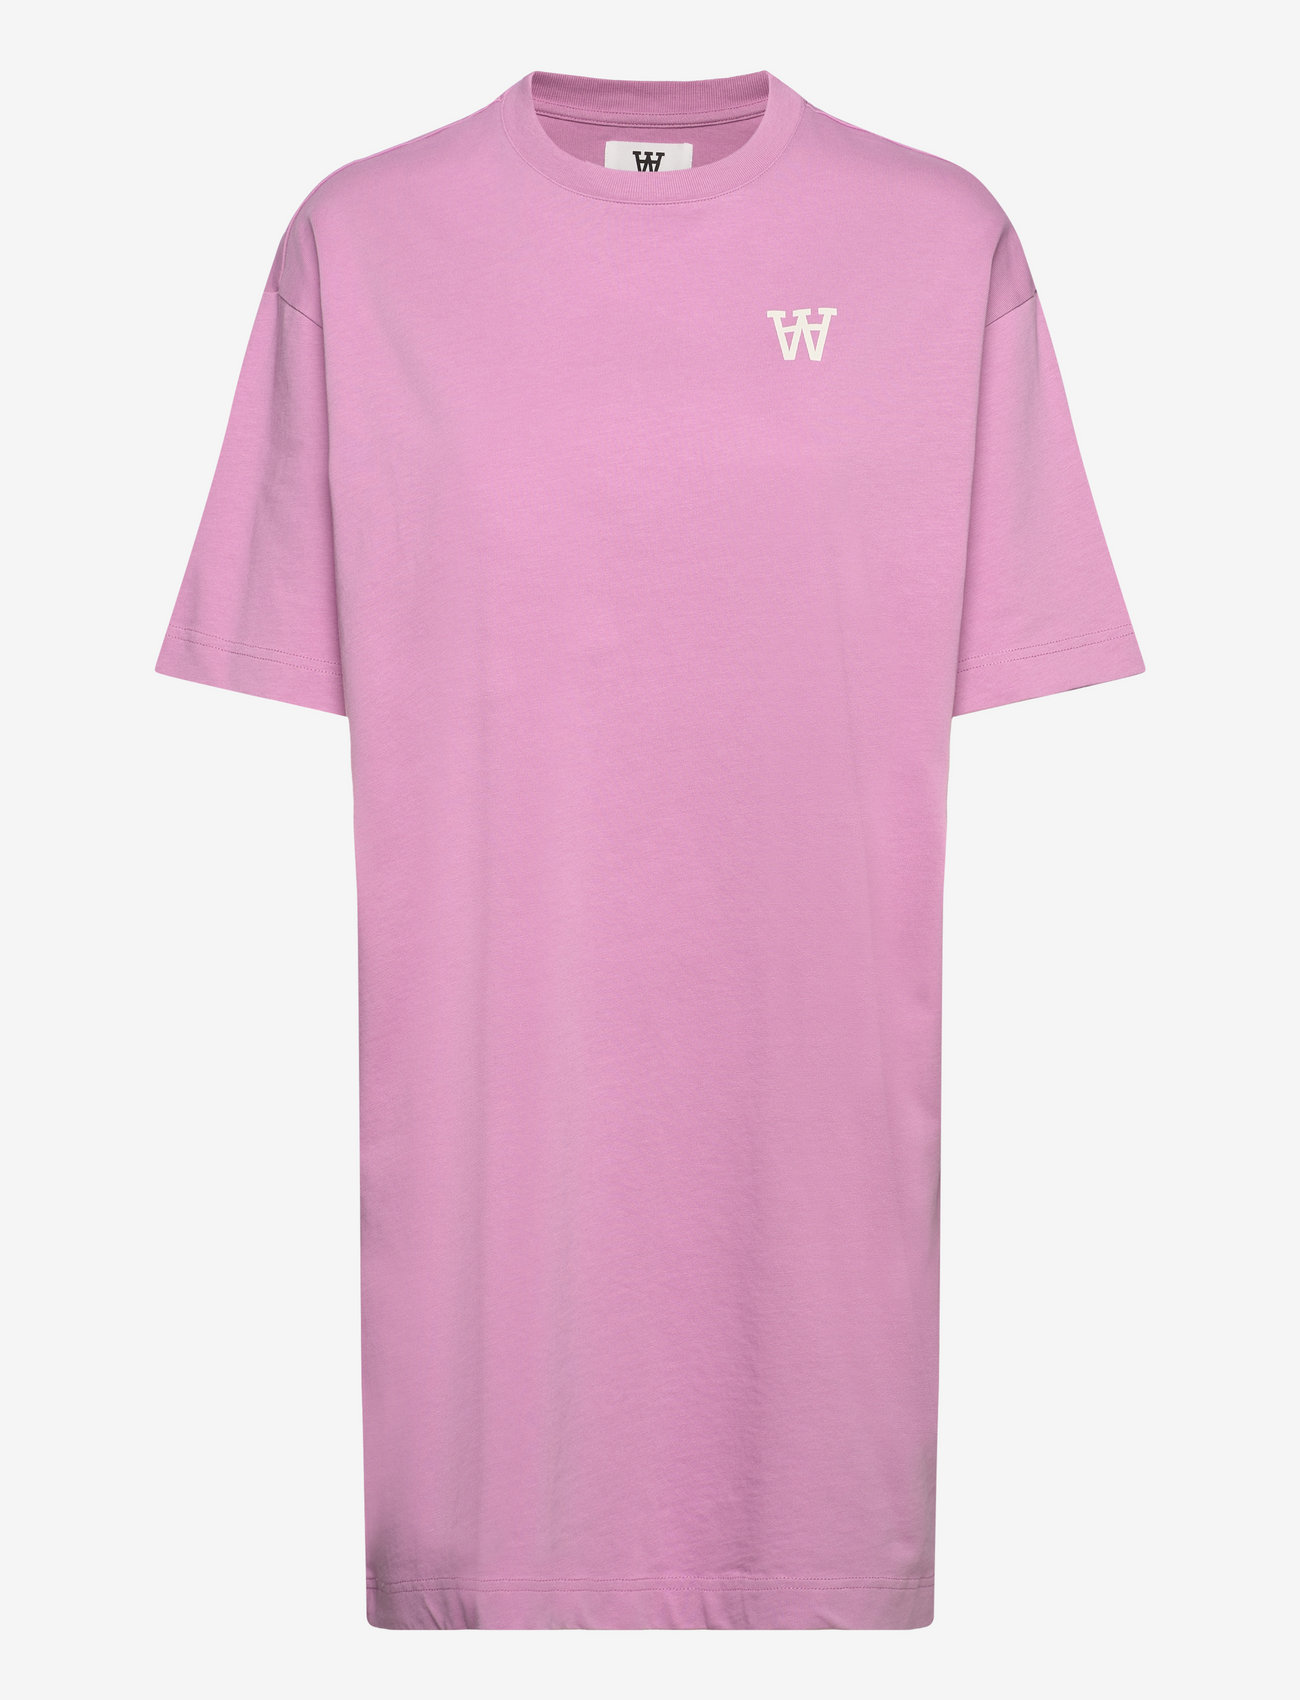 Double A by Wood Wood - Ulla AA dress - t-shirt-kleider - rosy lavender - 0